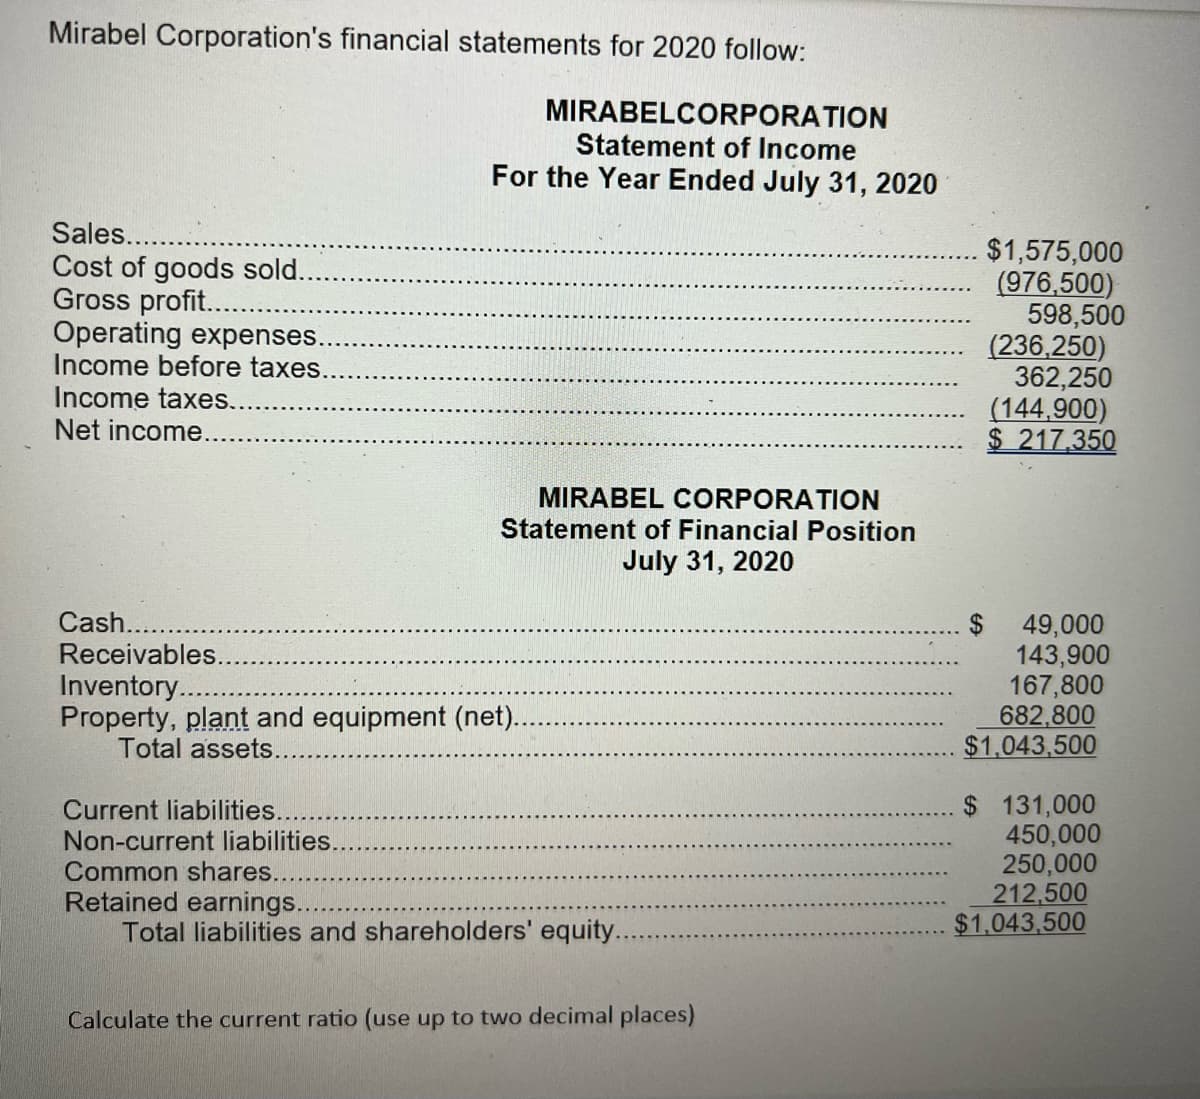 Mirabel Corporation's financial statements for 2020 follow:
Sales......
Cost of goods sold.
Gross profit....
Operating expenses.
Income before taxes.
Income taxes..
Net income..
MIRABELCORPORATION
Statement of Income
For the Year Ended July 31, 2020
Cash.
Receivables.
Inventory......
MIRABEL CORPORATION
Statement of Financial Position
July 31, 2020
Property, plant and equipment (net).
Total assets.
Current liabilities.
Non-current liabilities.
Common shares.
Retained earnings..
Total liabilities and shareholders' equity.
Calculate the current ratio (use up to two decimal places)
$1,575,000
(976,500)
598,500
(236,250)
362,250
(144,900)
$217,350
49,000
143,900
167,800
682,800
$1,043,500
$ 131,000
450,000
250,000
212,500
$1,043,500